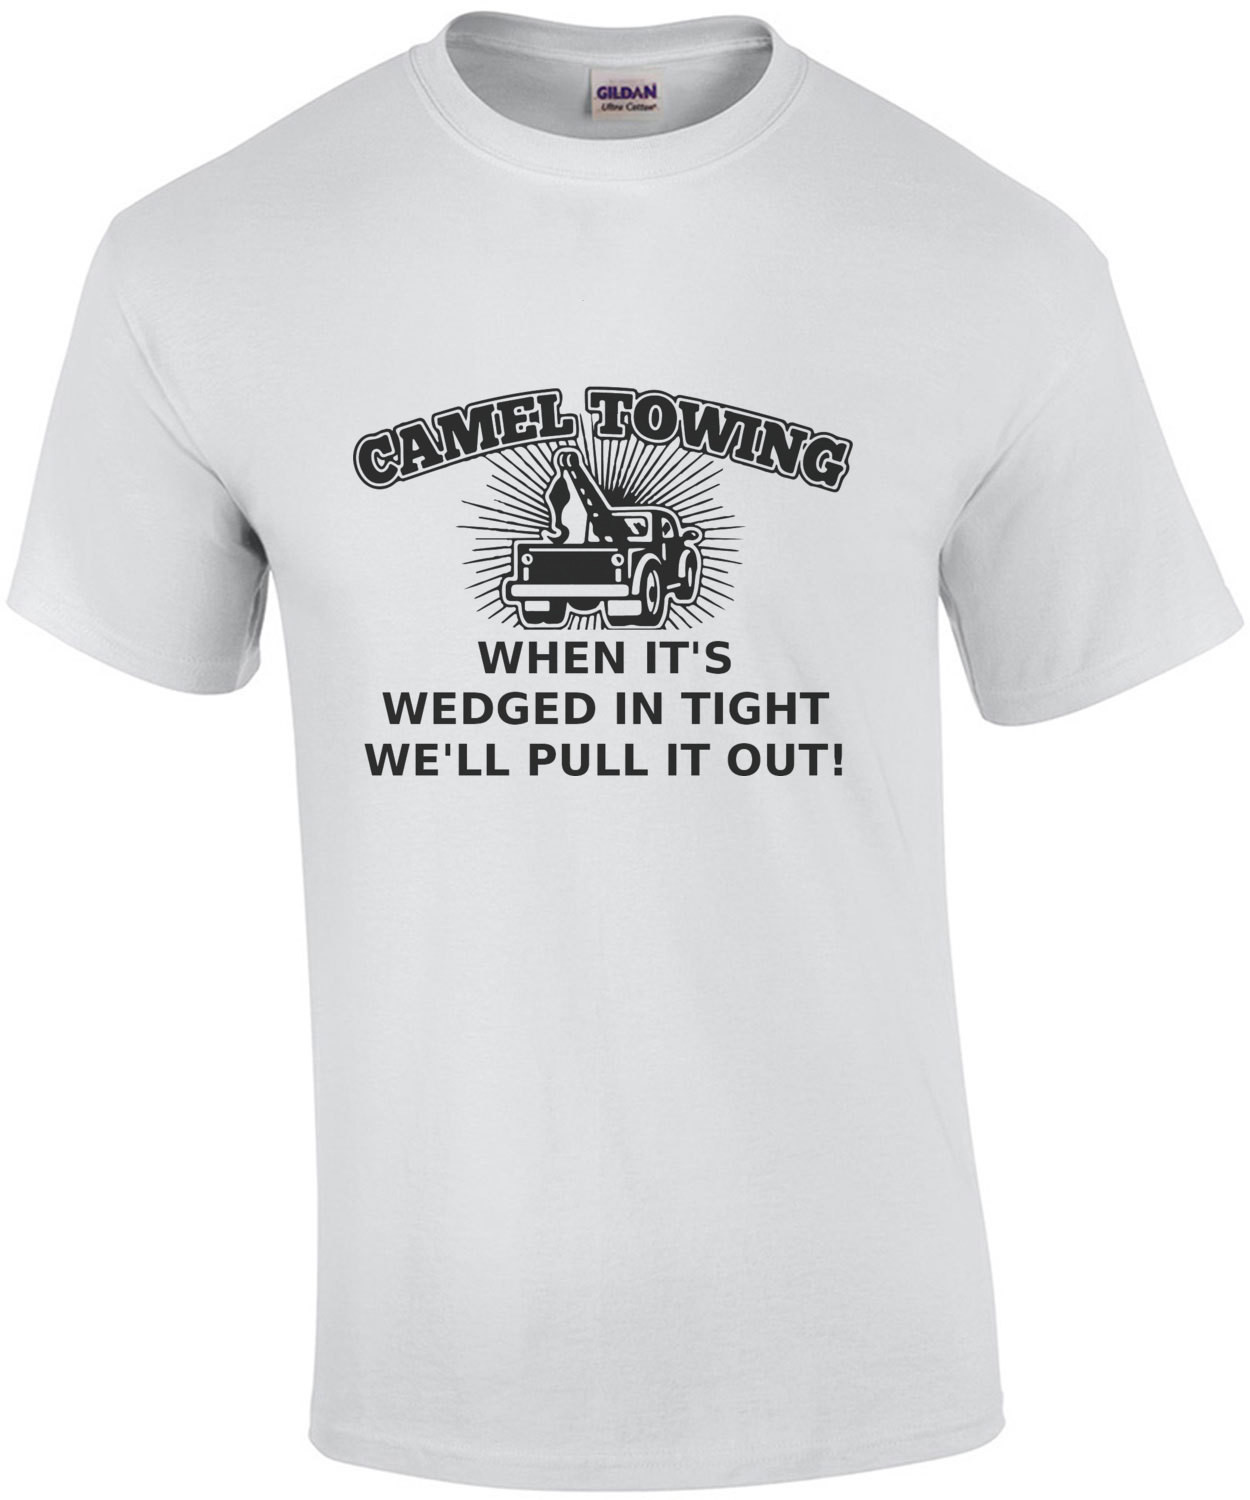 Camel Towing - When it's wedged in tight we'll pull you out!